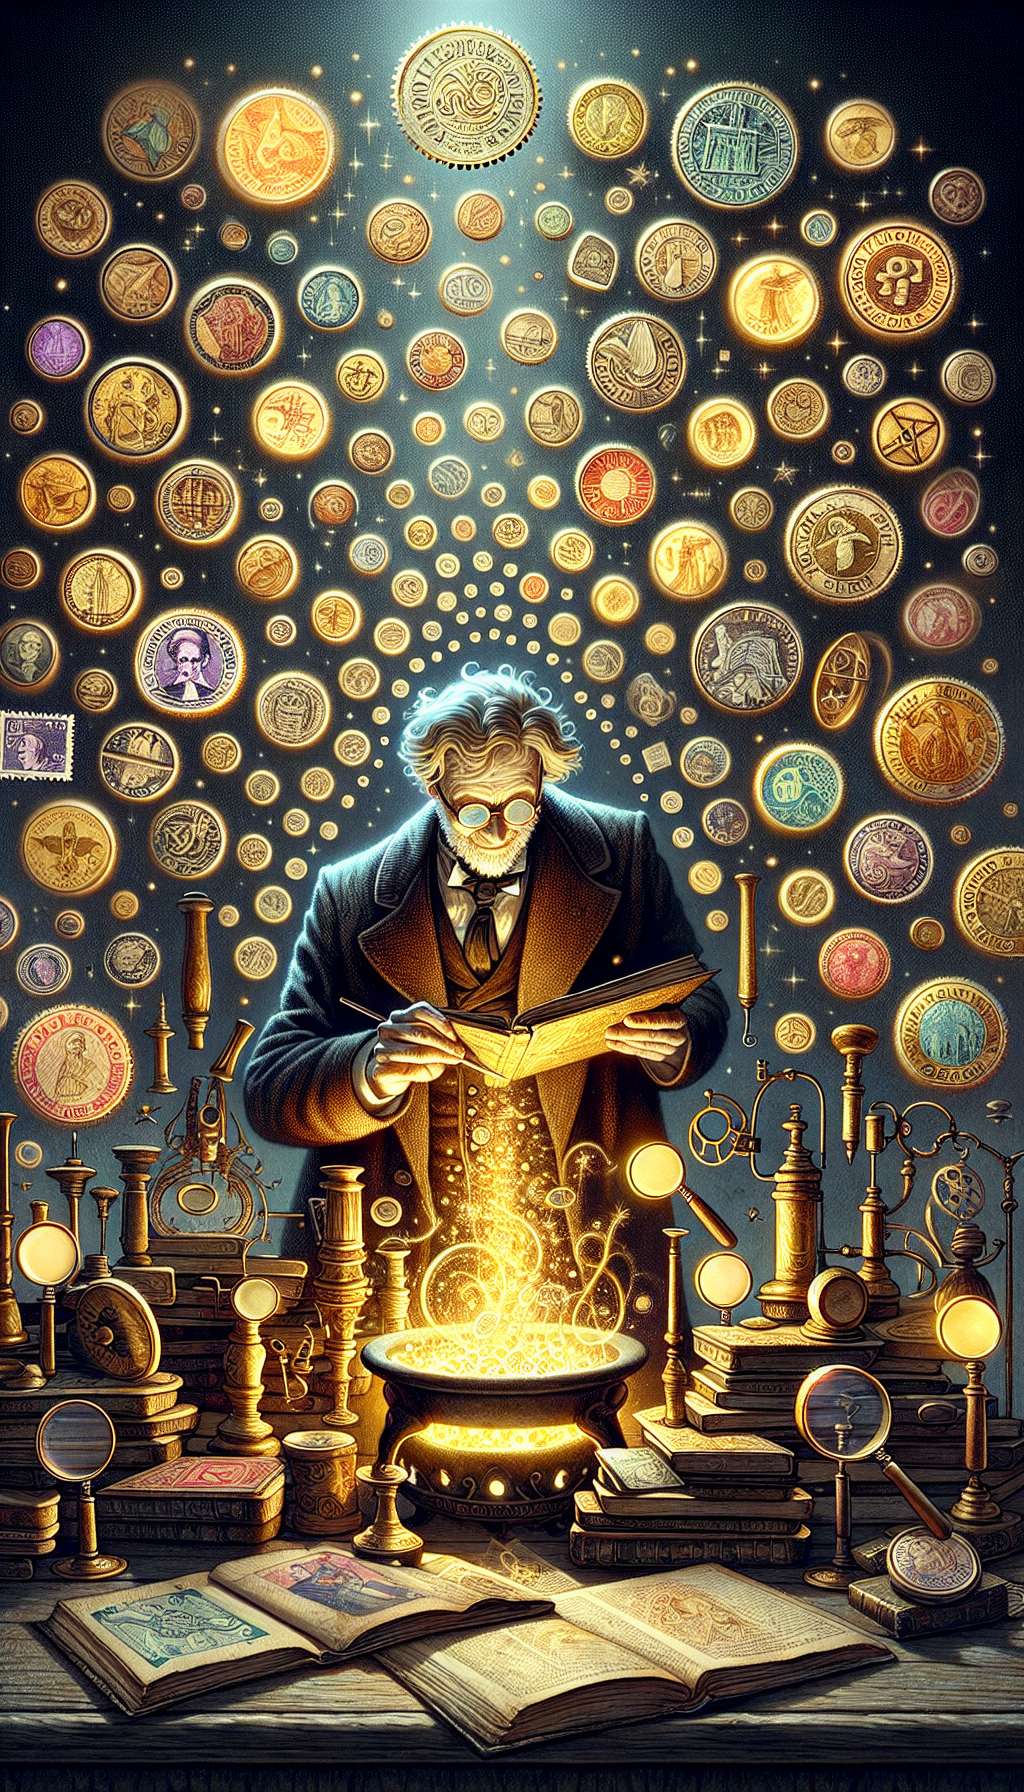 A whimsical alchemist pores over an ancient book, his desk cluttered with magnifying glasses and exotic tools, amidst piles of old, glowing stamps that spiral upward, transforming into shimmering gold coins above a cauldron. One stamp, centrally featured, morphs halfway between paper and gold, symbolizing the lucrative magic of philately. Each stamp vignette recalls a unique historical style, from Victorian to Art Deco.